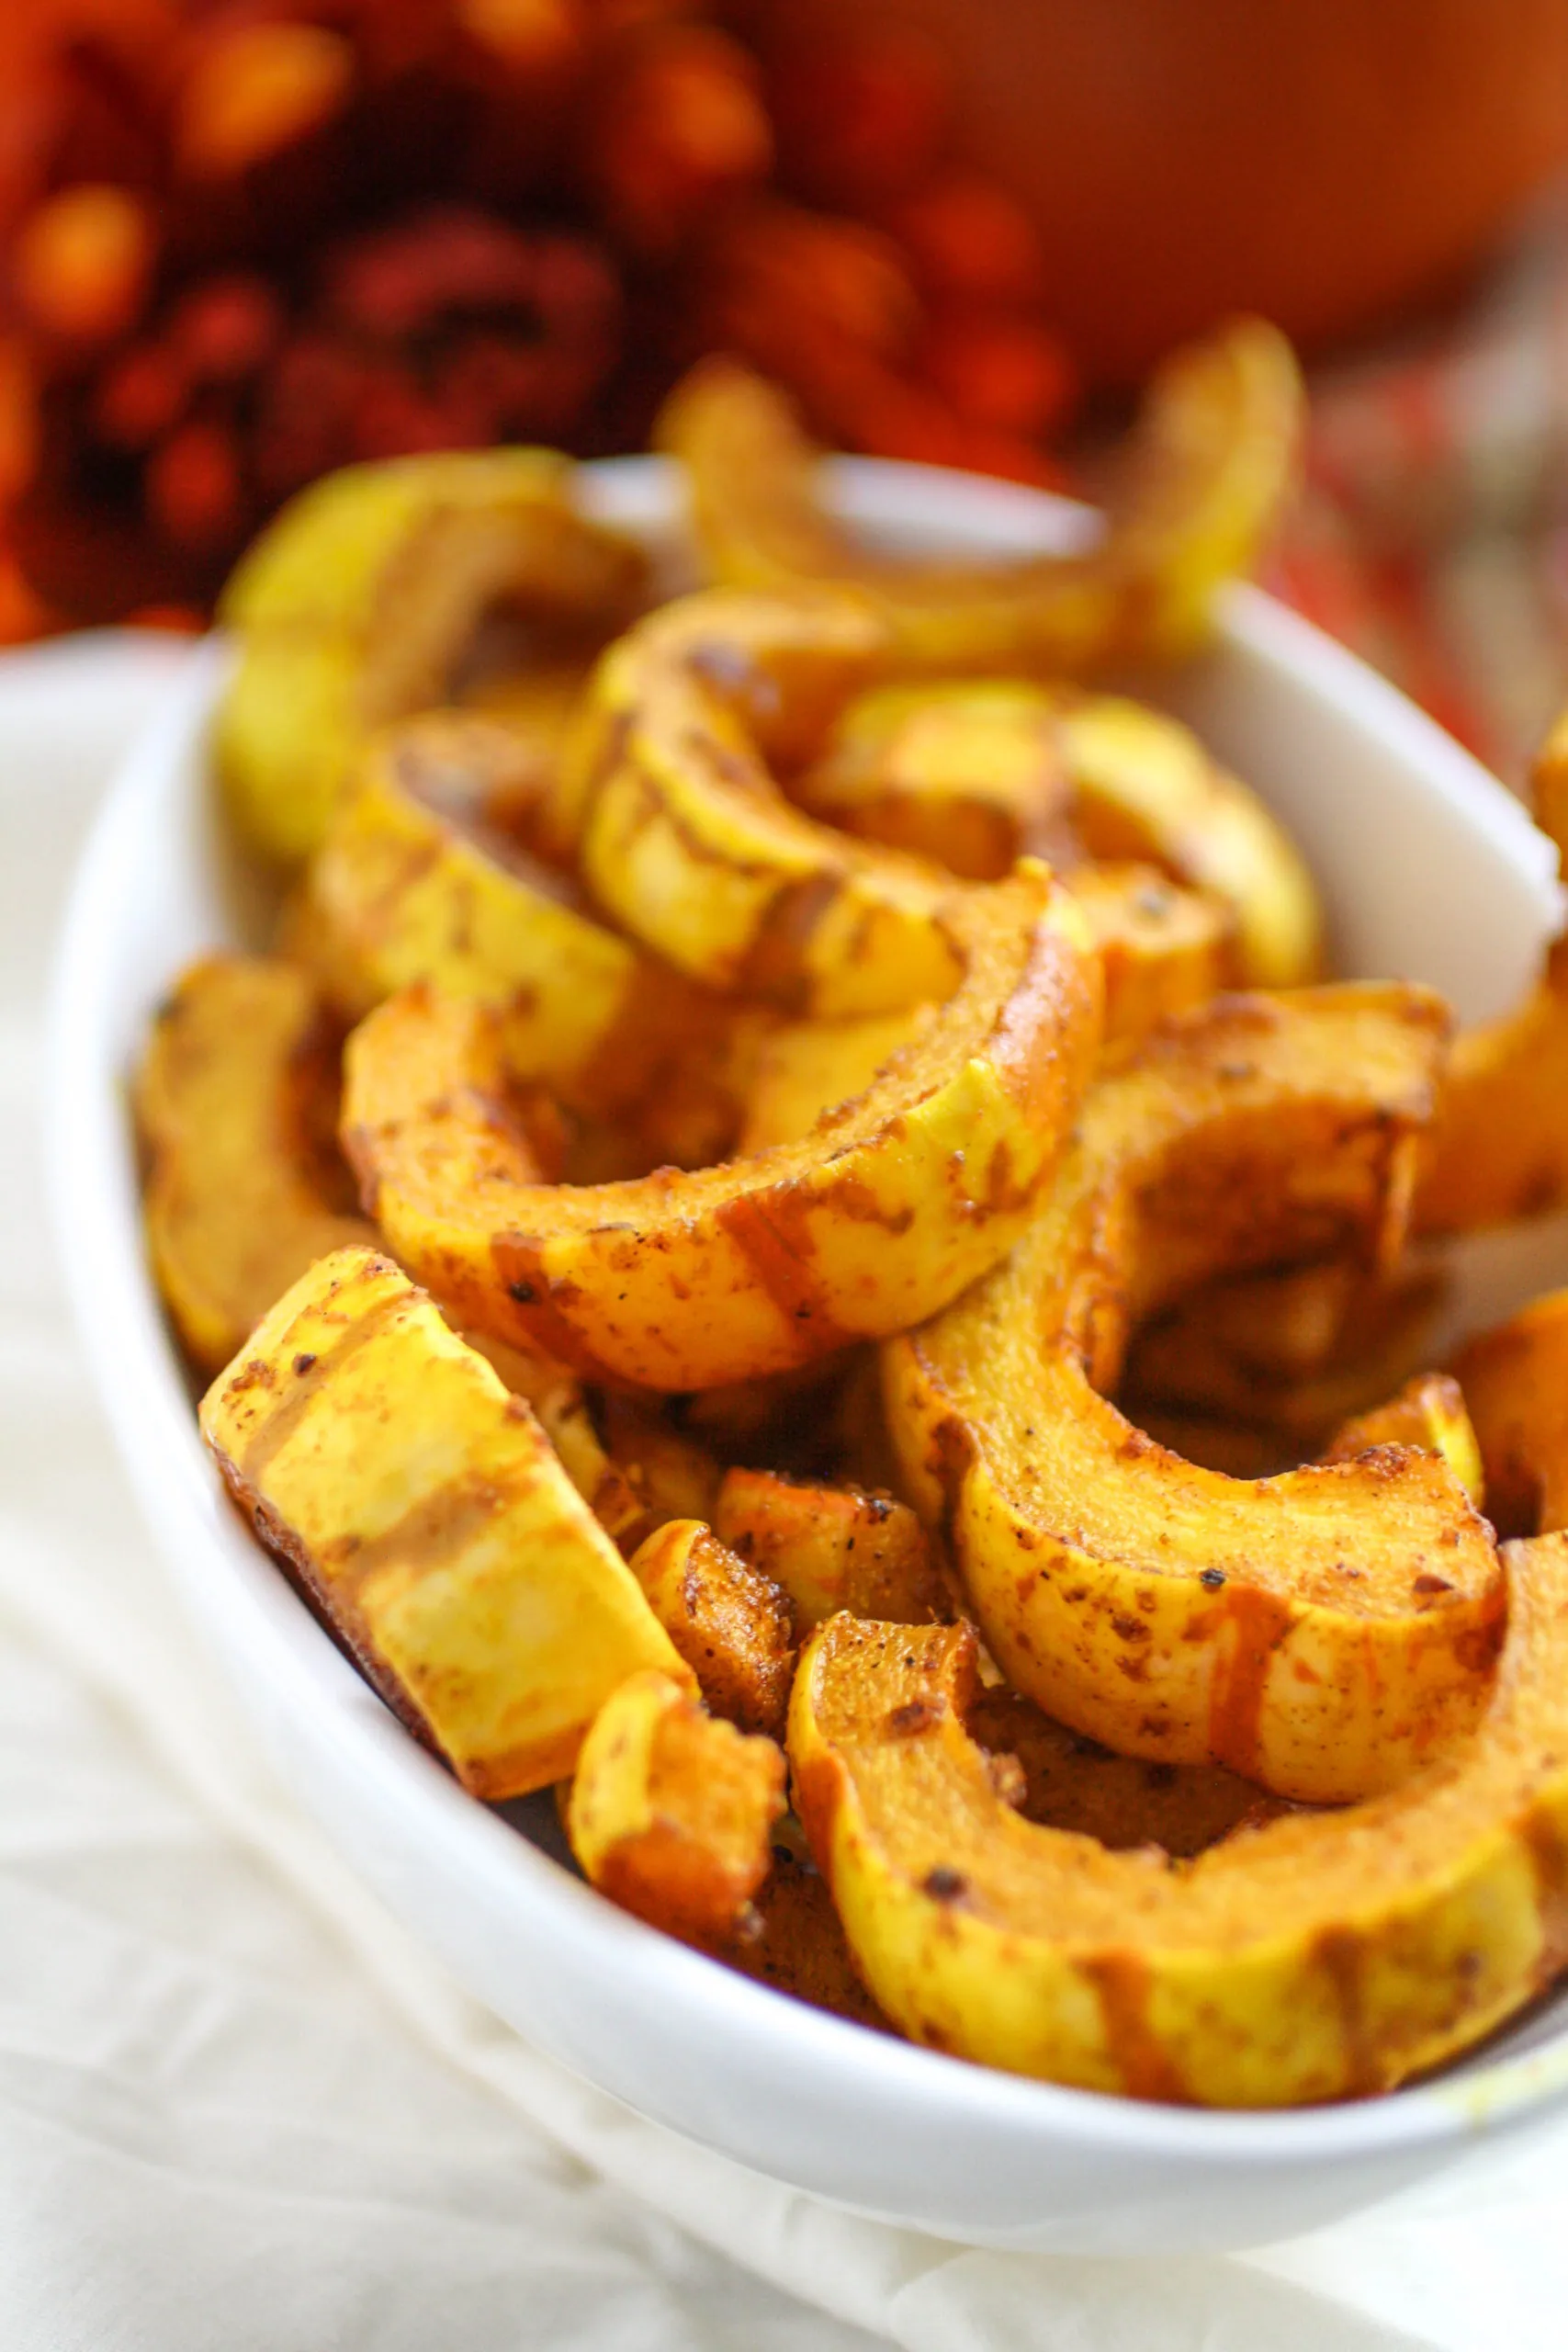 Curry-Roasted Delicata Squash is a fabulous side dish to serve this season!